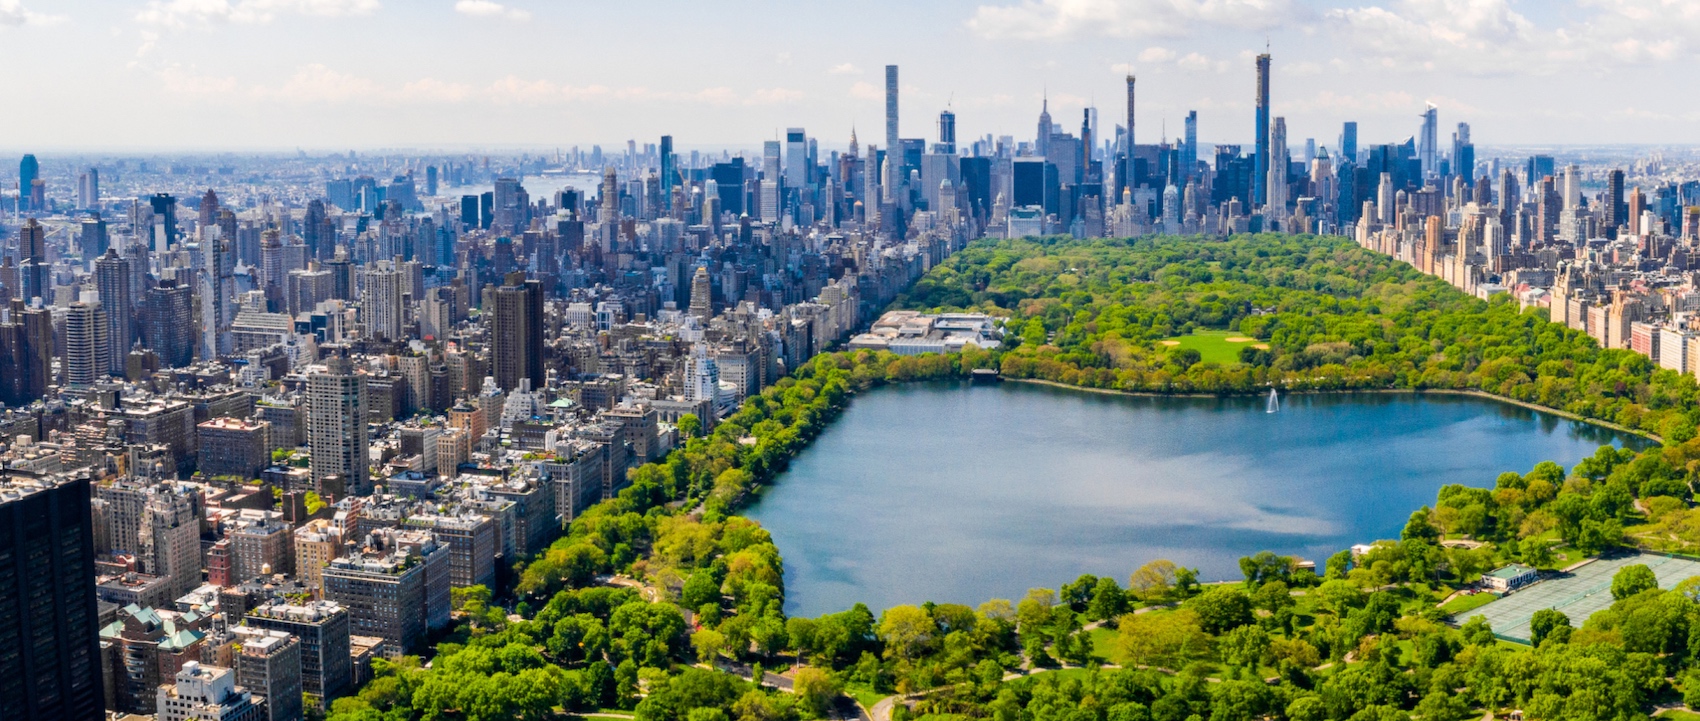 New York City Central Park from above